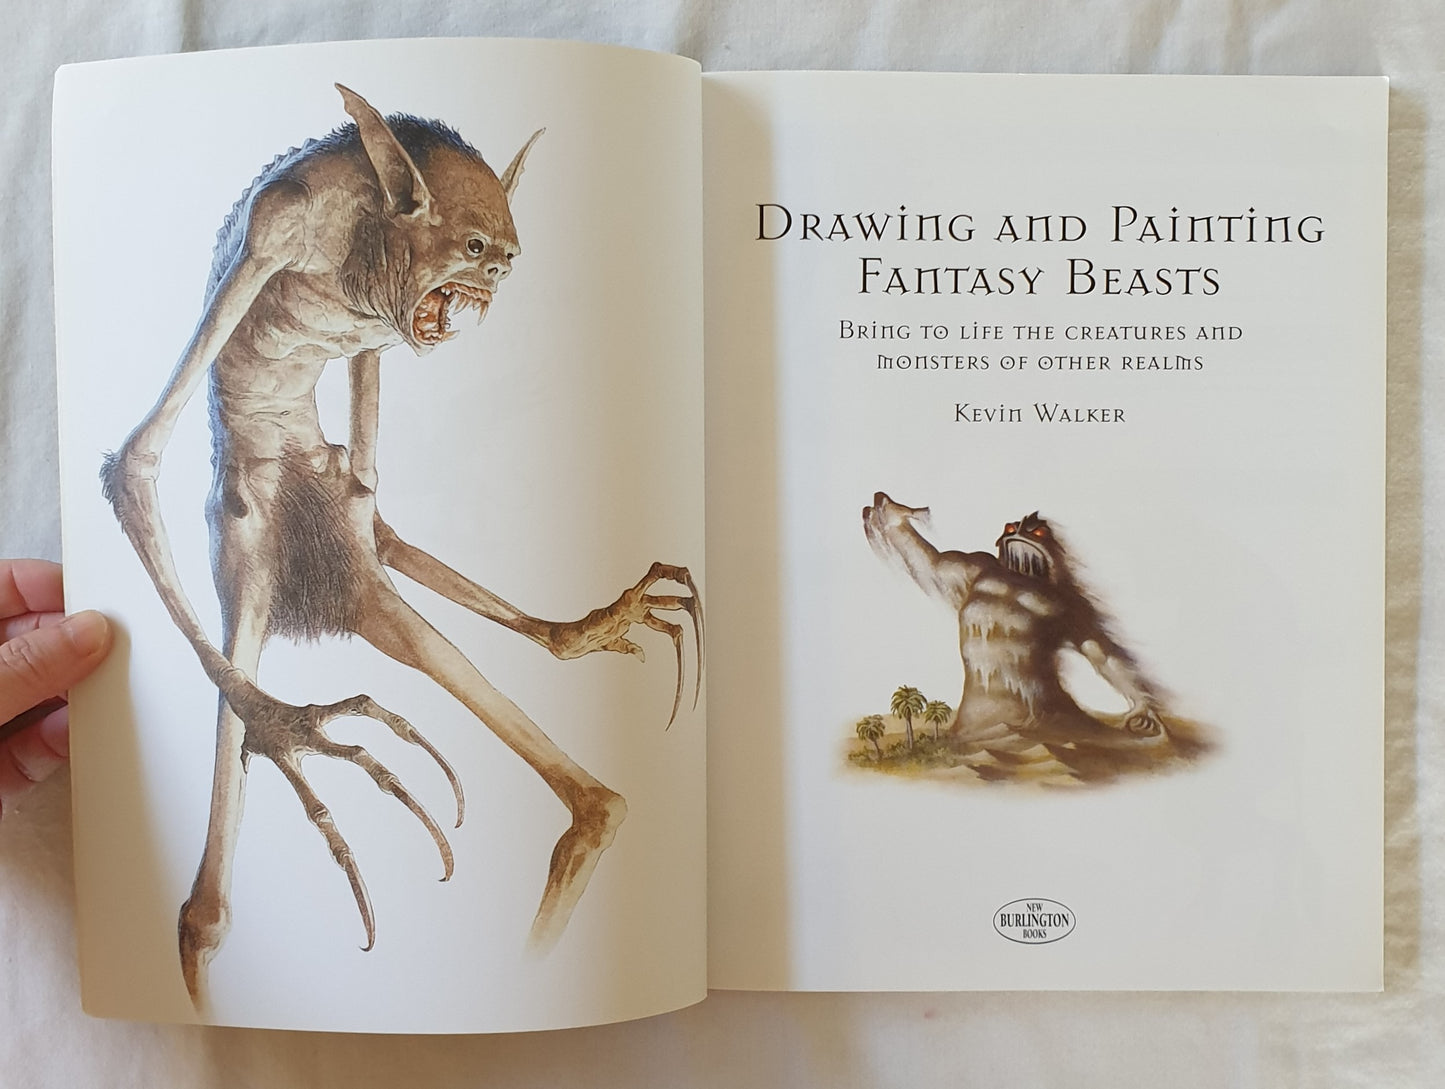 Drawing and Painting Fantasy Beasts by Kevin Walker